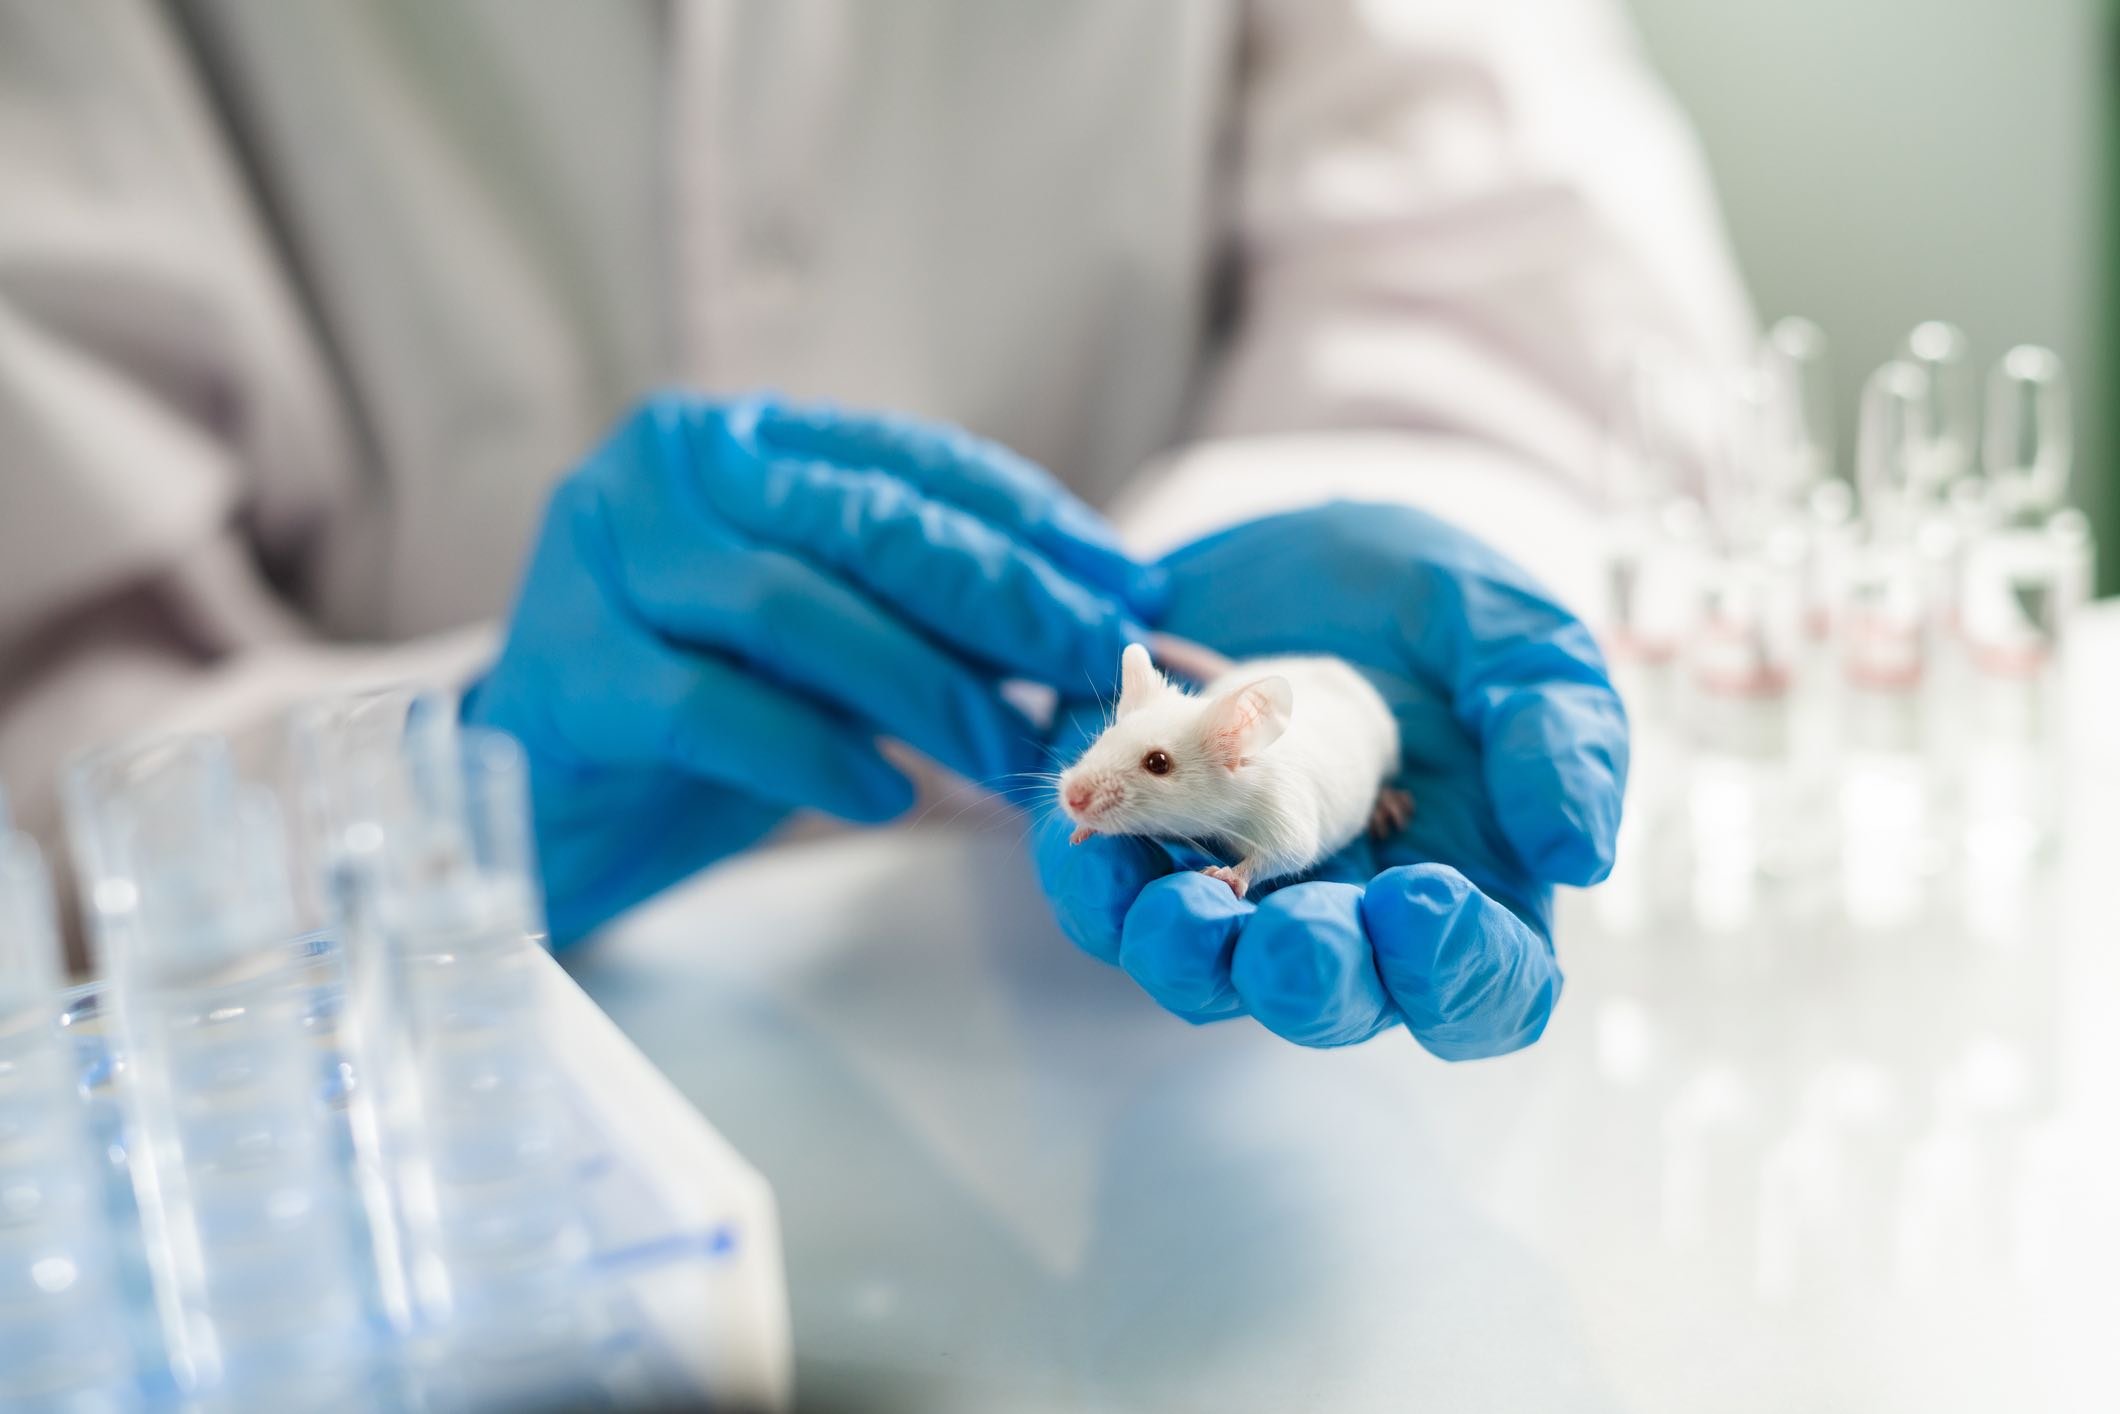 Veterinary oncology technician holding a mouse in gloved hand